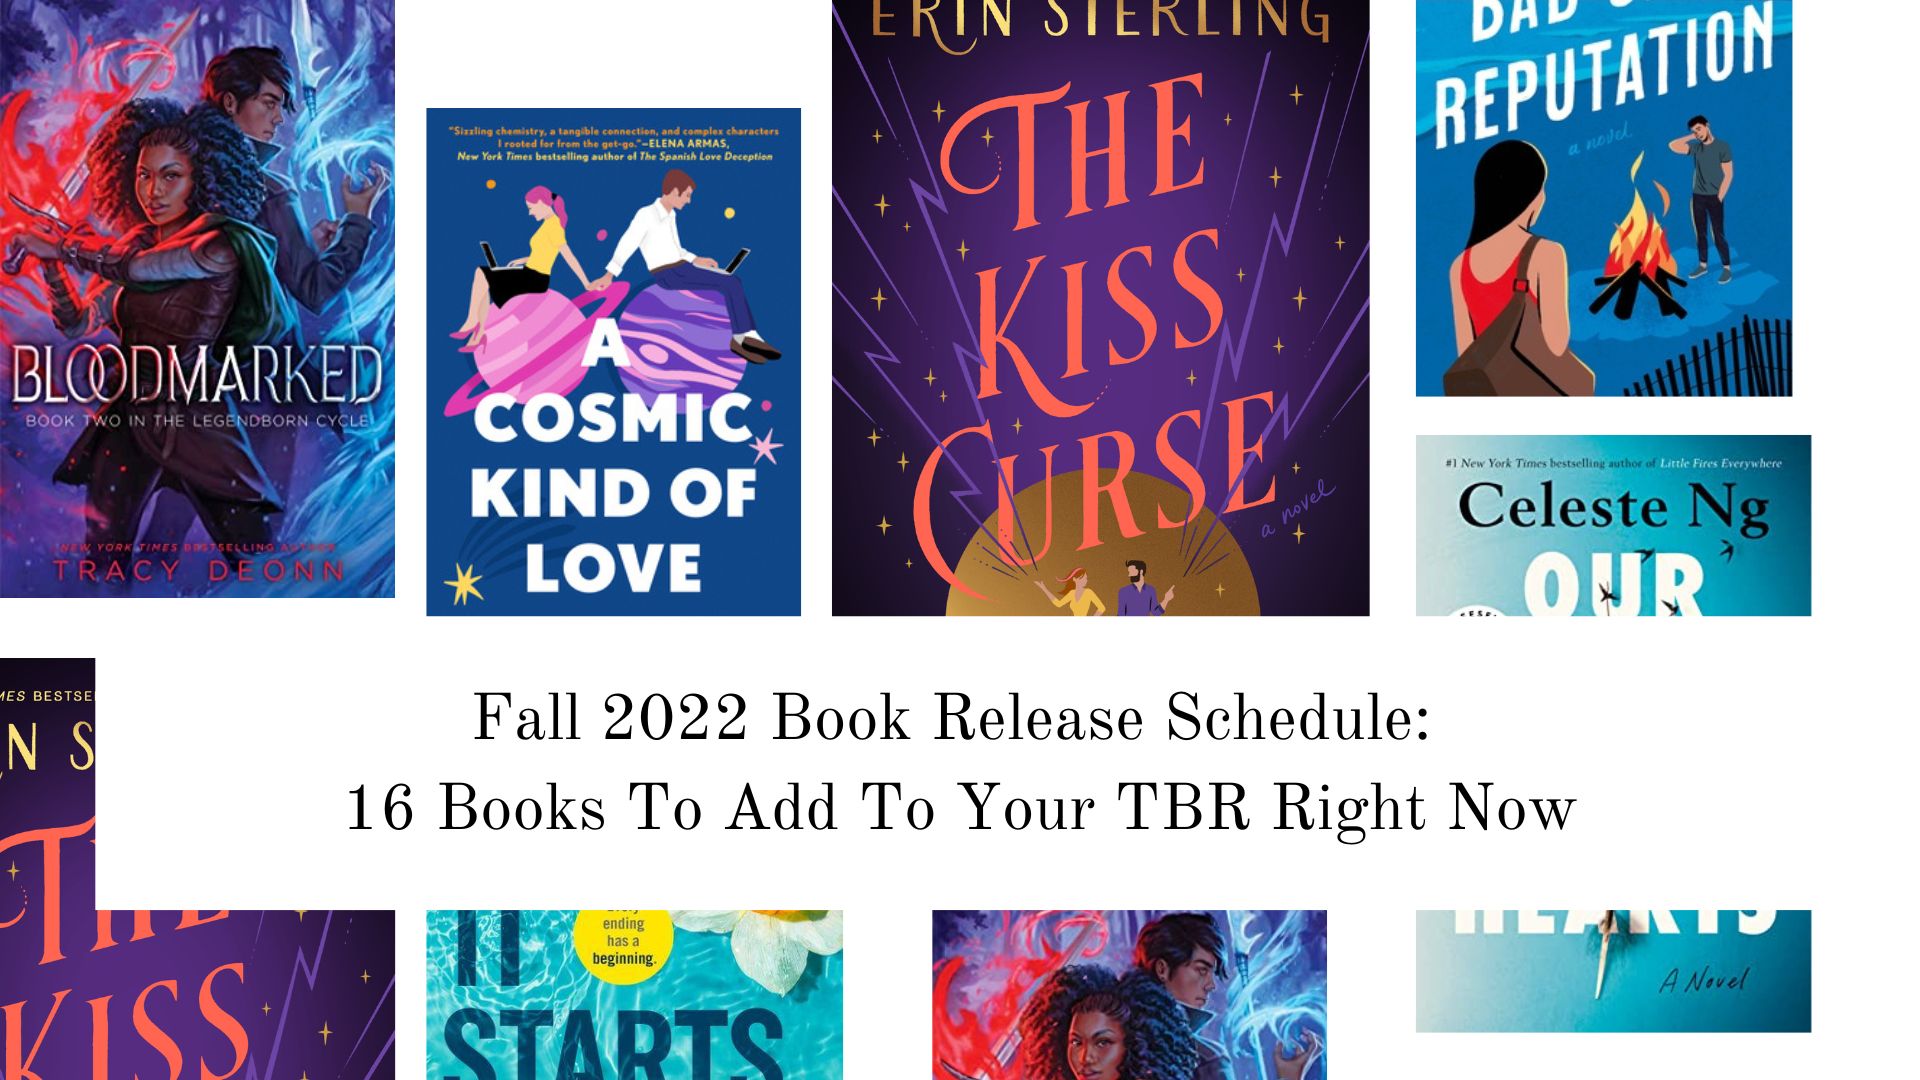 Fall 2022 Book Release Schedule: 16 Books To Add To Your TBR Right Now